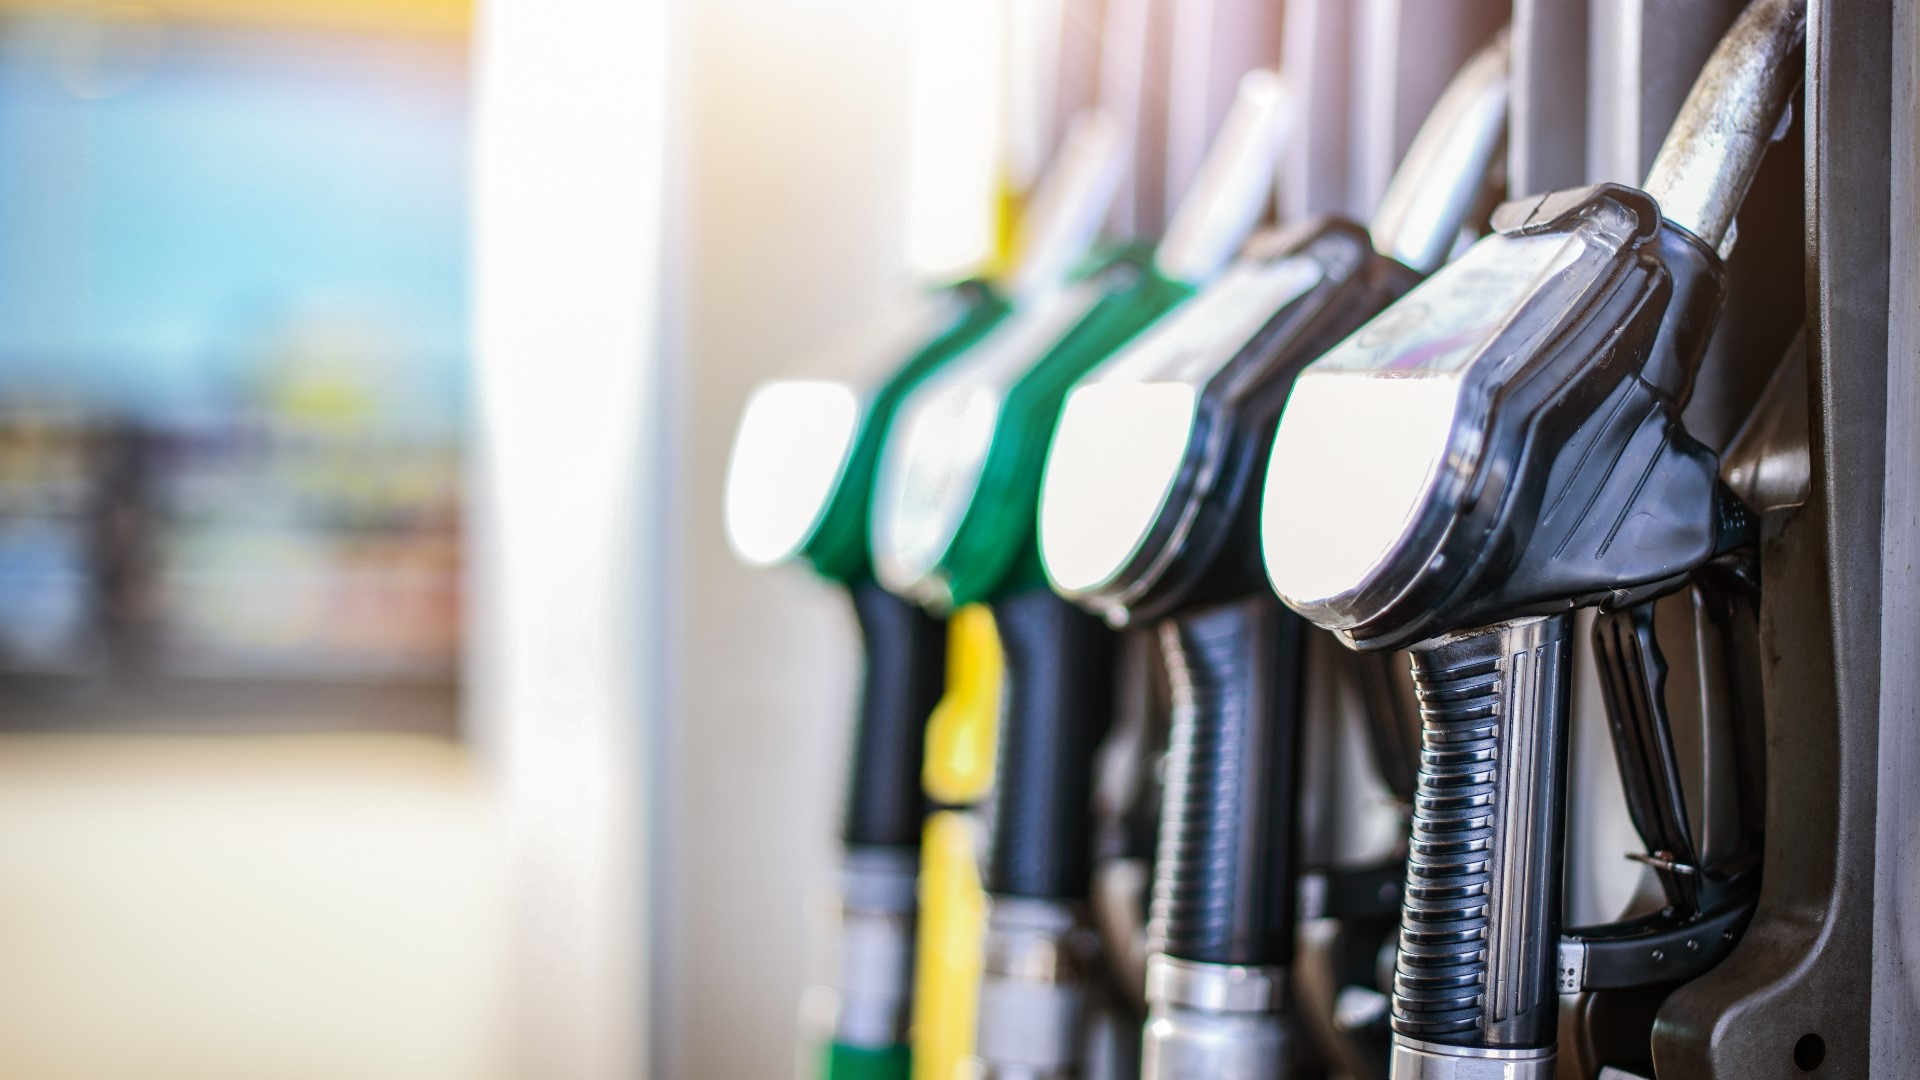 Drivers, you may soon see some relief at the pump.